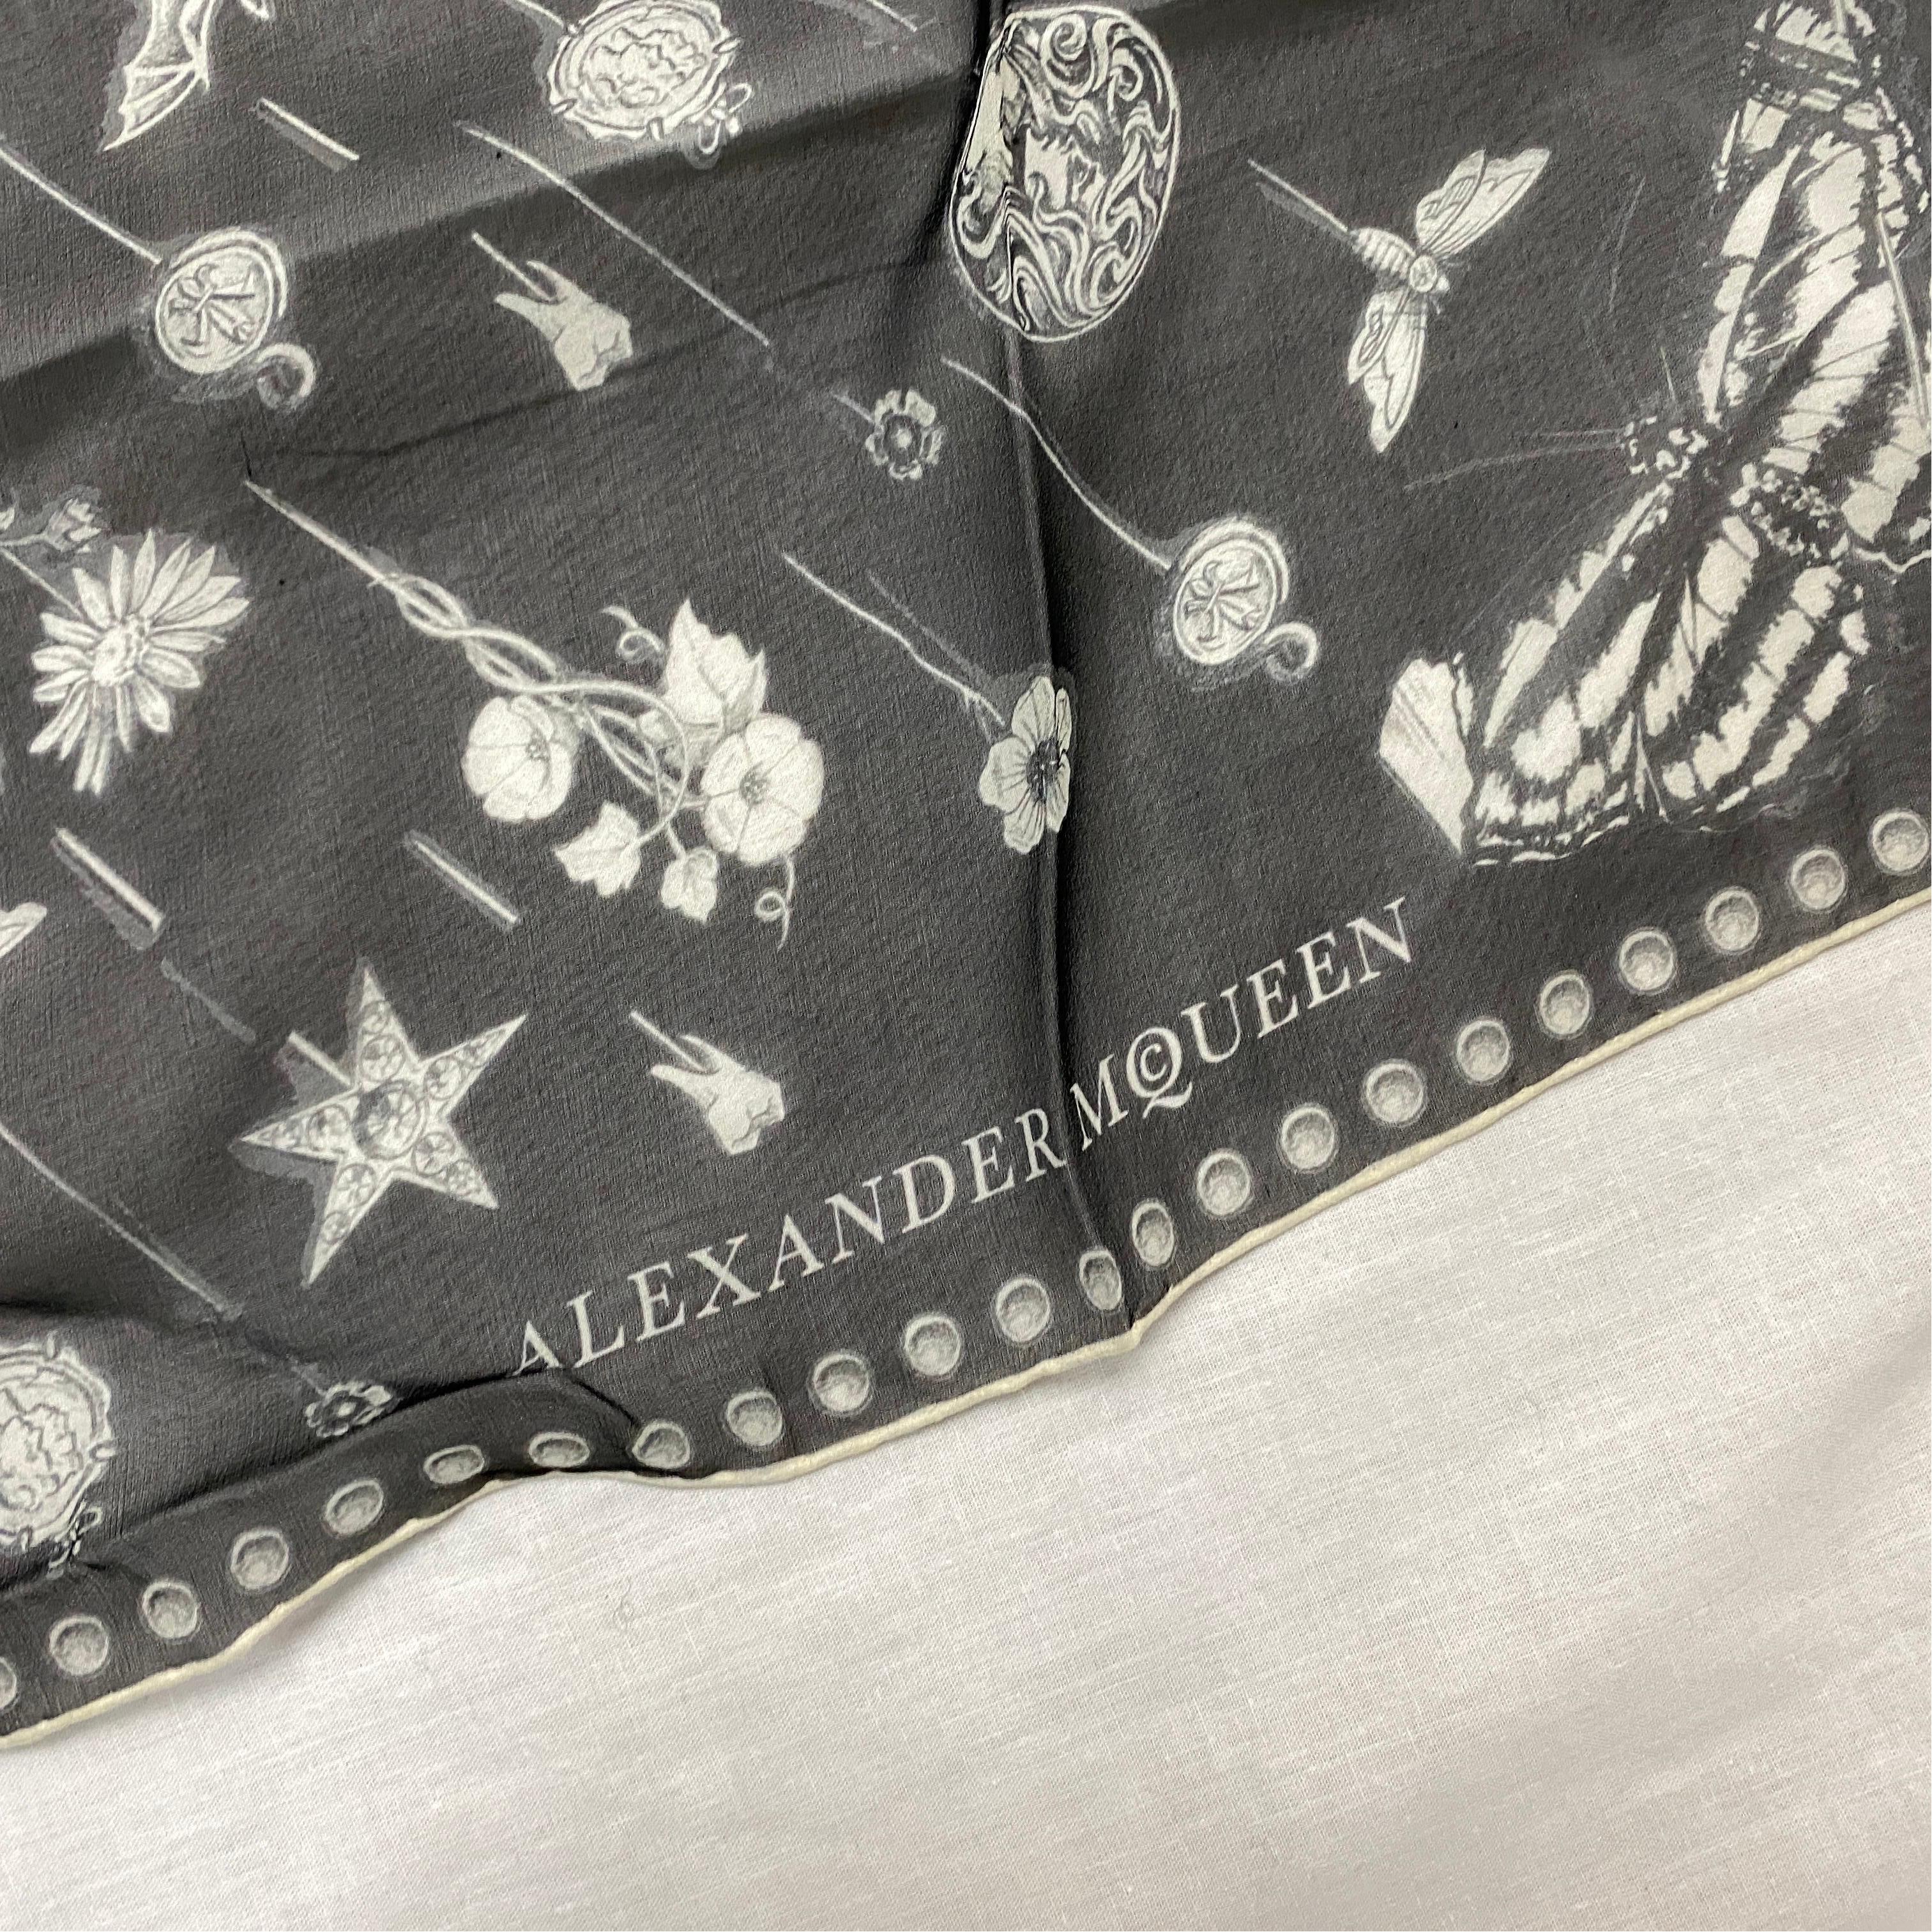 Women's or Men's Iconic Black and White Silk Scarf by Alexander McQueen, with central Skull